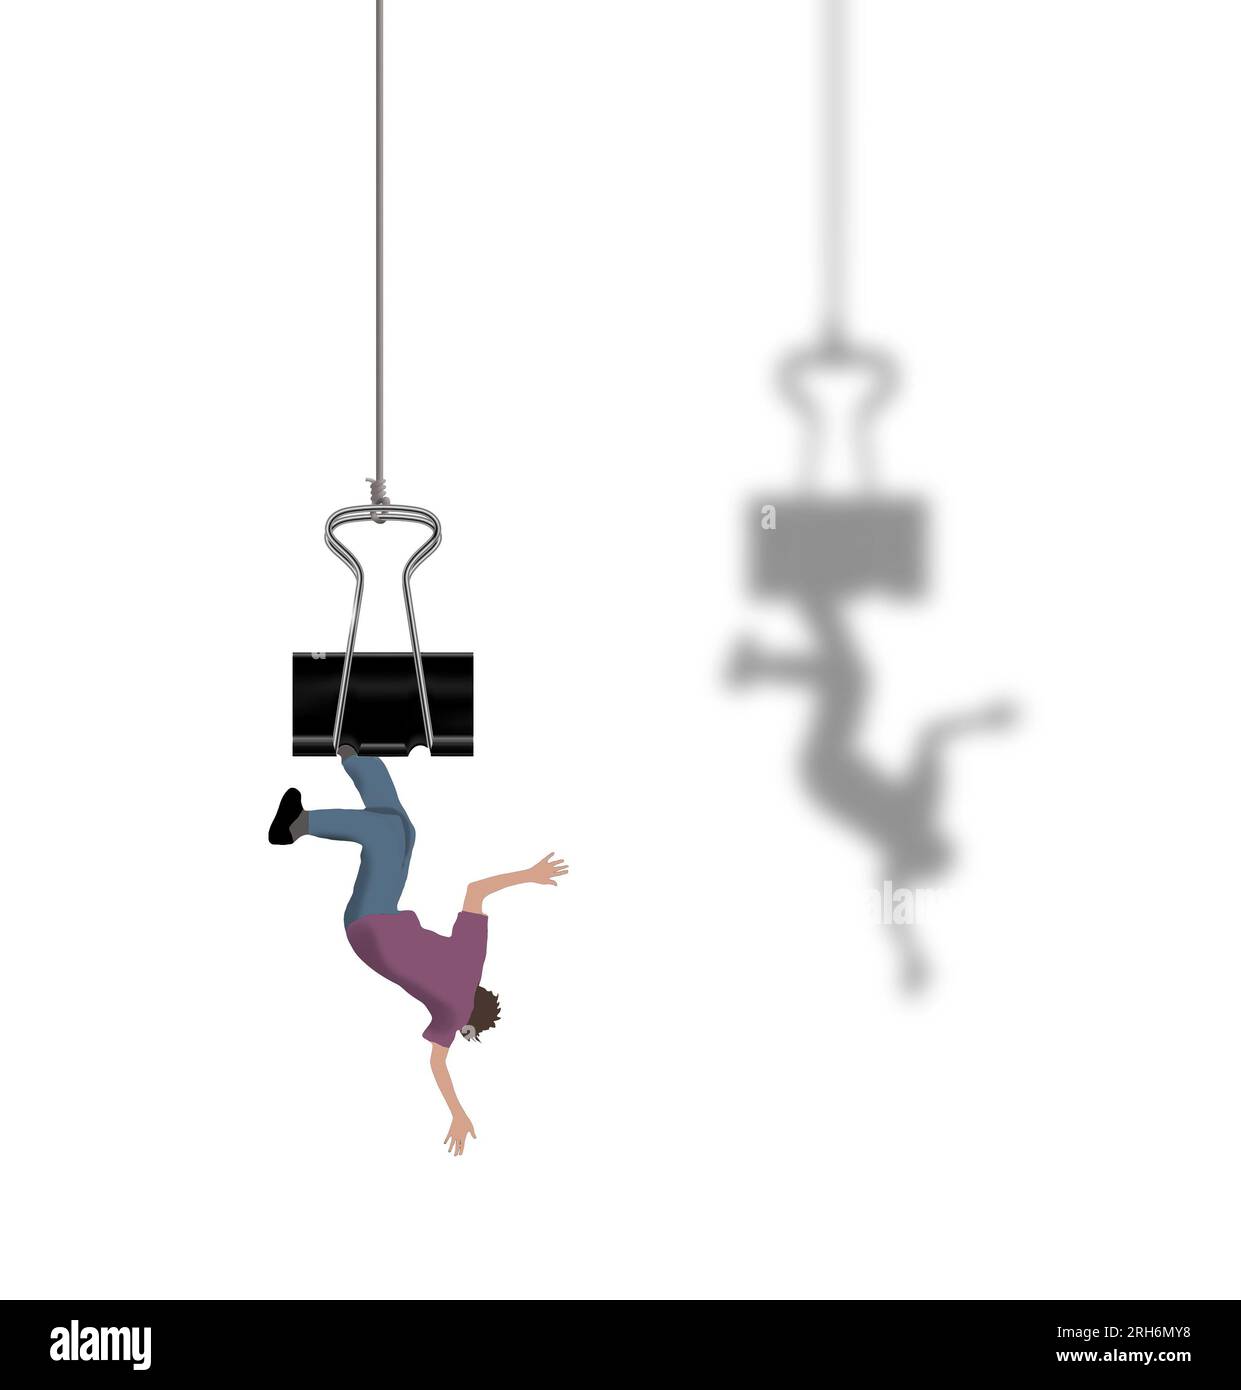 An office worker is hung out to dry on a paper clamp on a string in a 3-d illustration about office politics. Stock Photo